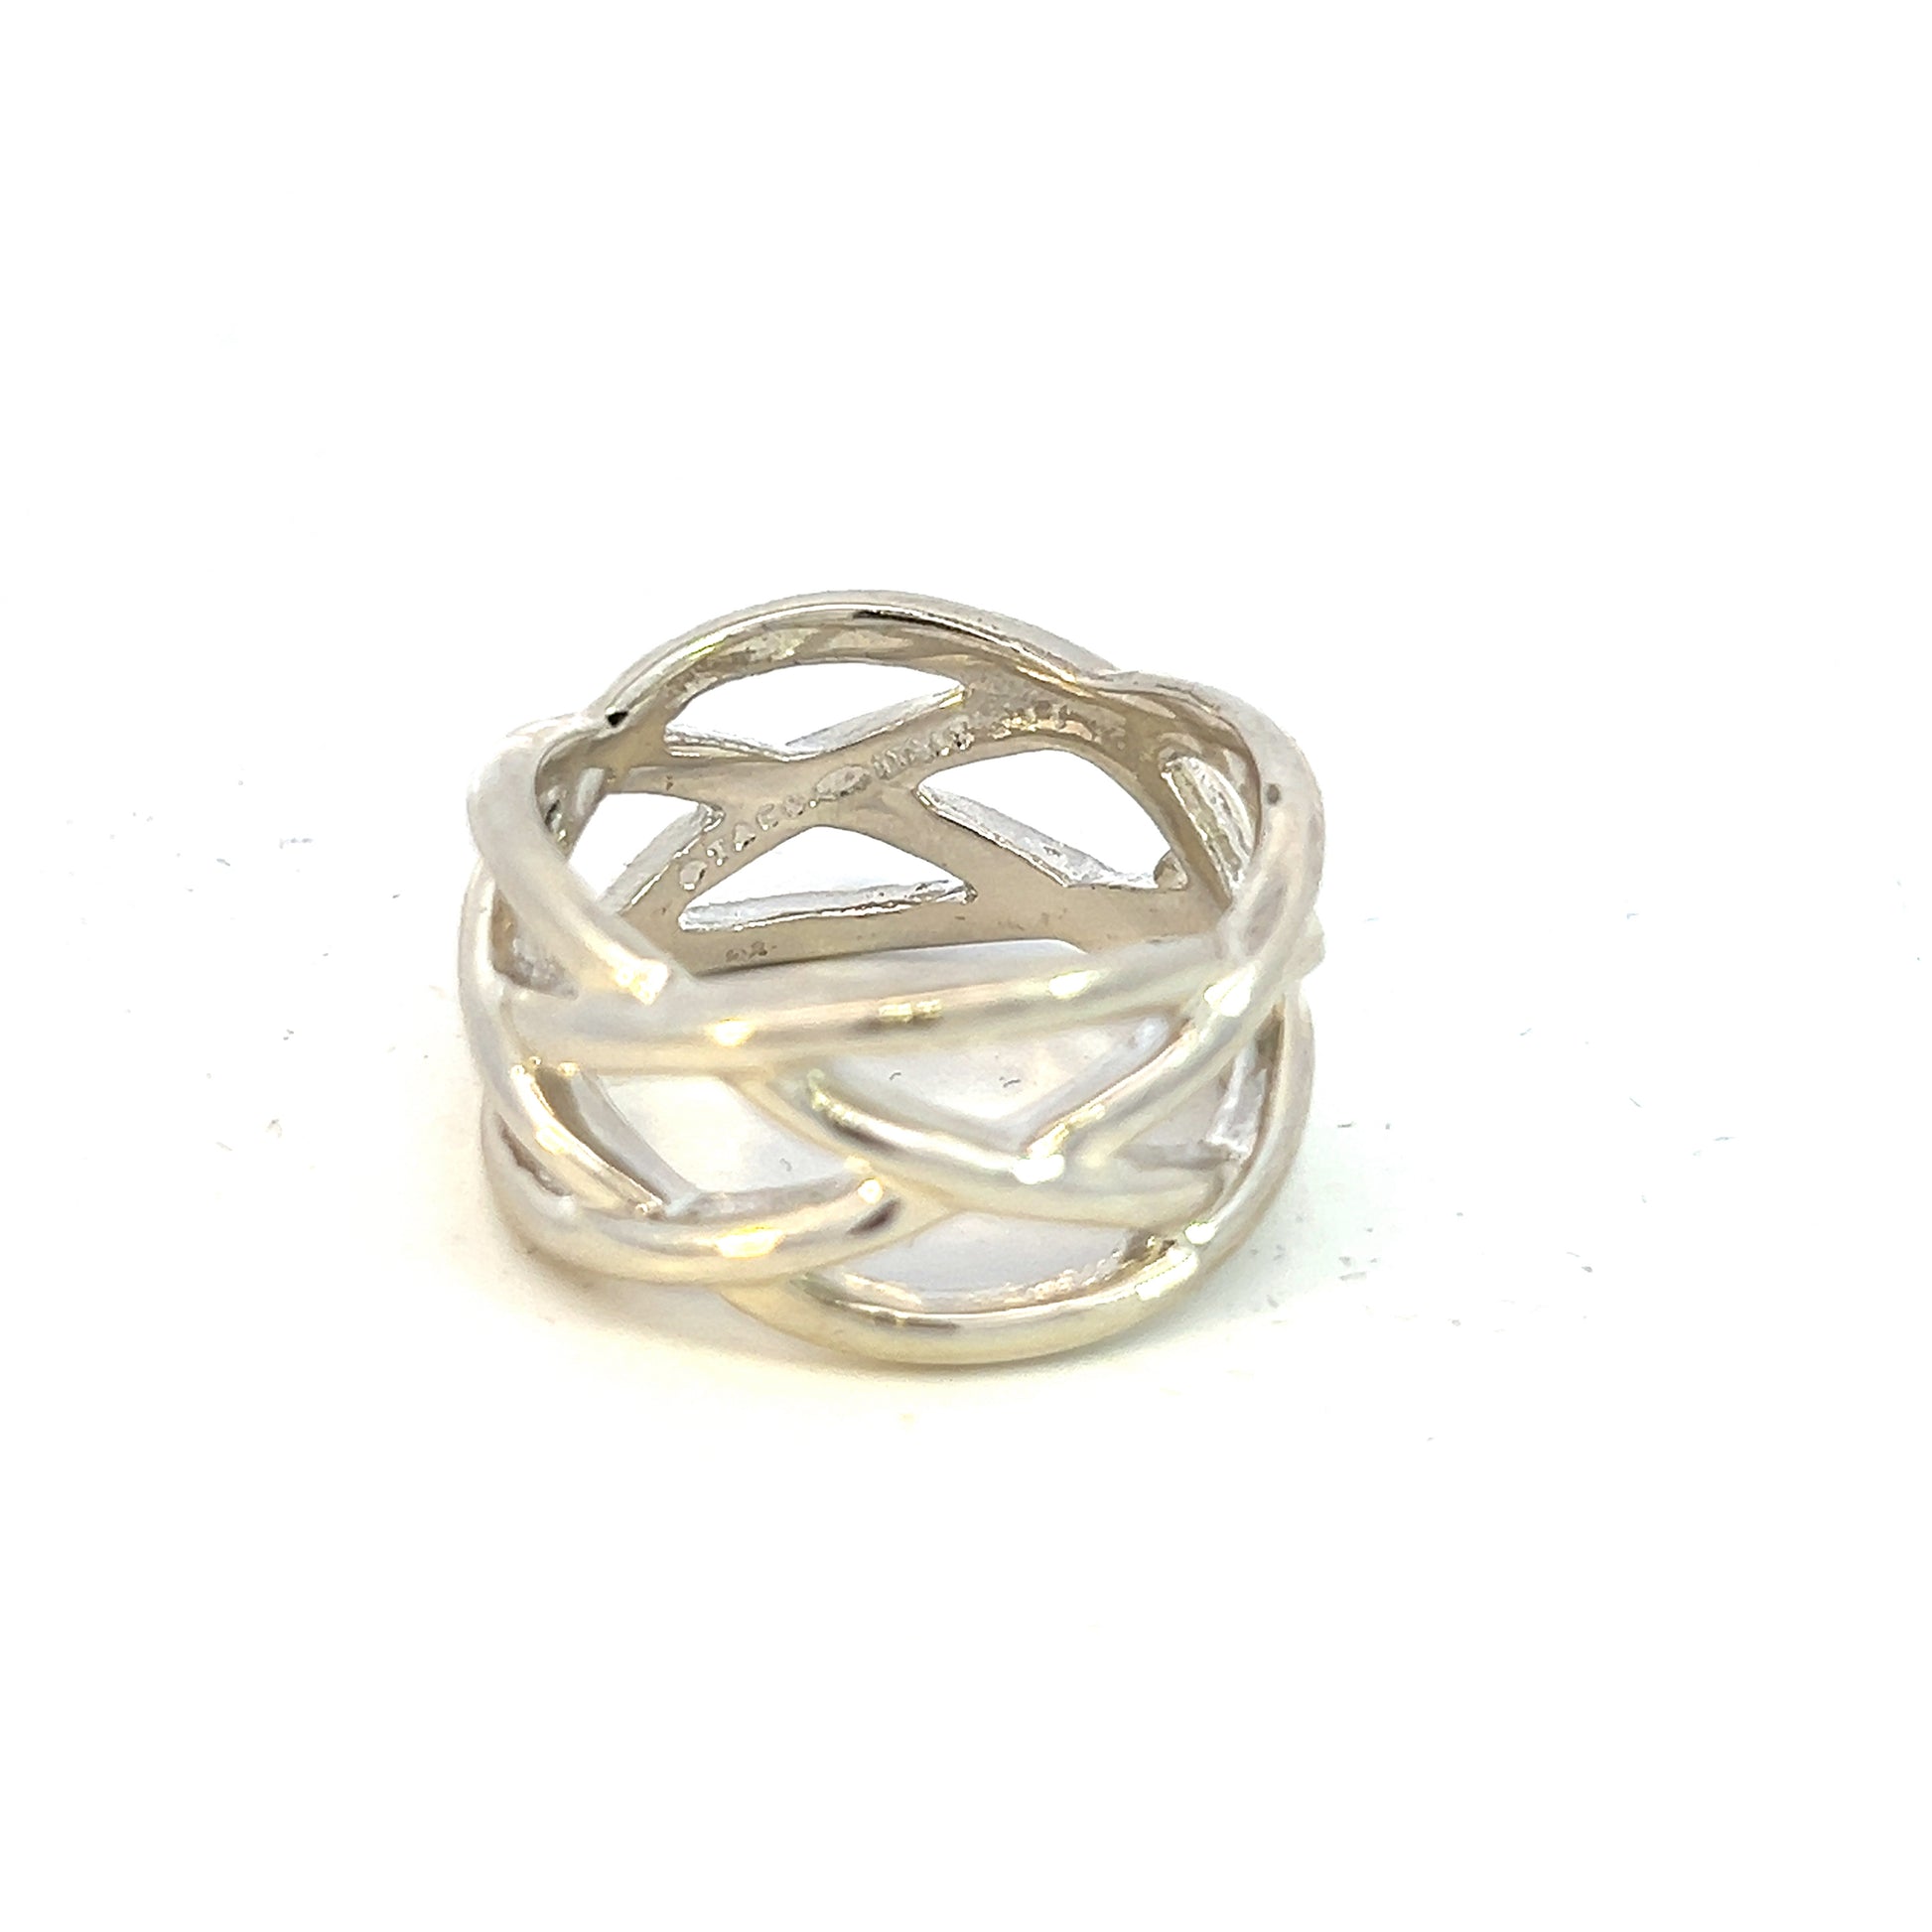 Tiffany & Co Estate Celtic Knot Ring Size 10 Sterling Silver 12 mm TIF566 - Certified Fine Jewelry